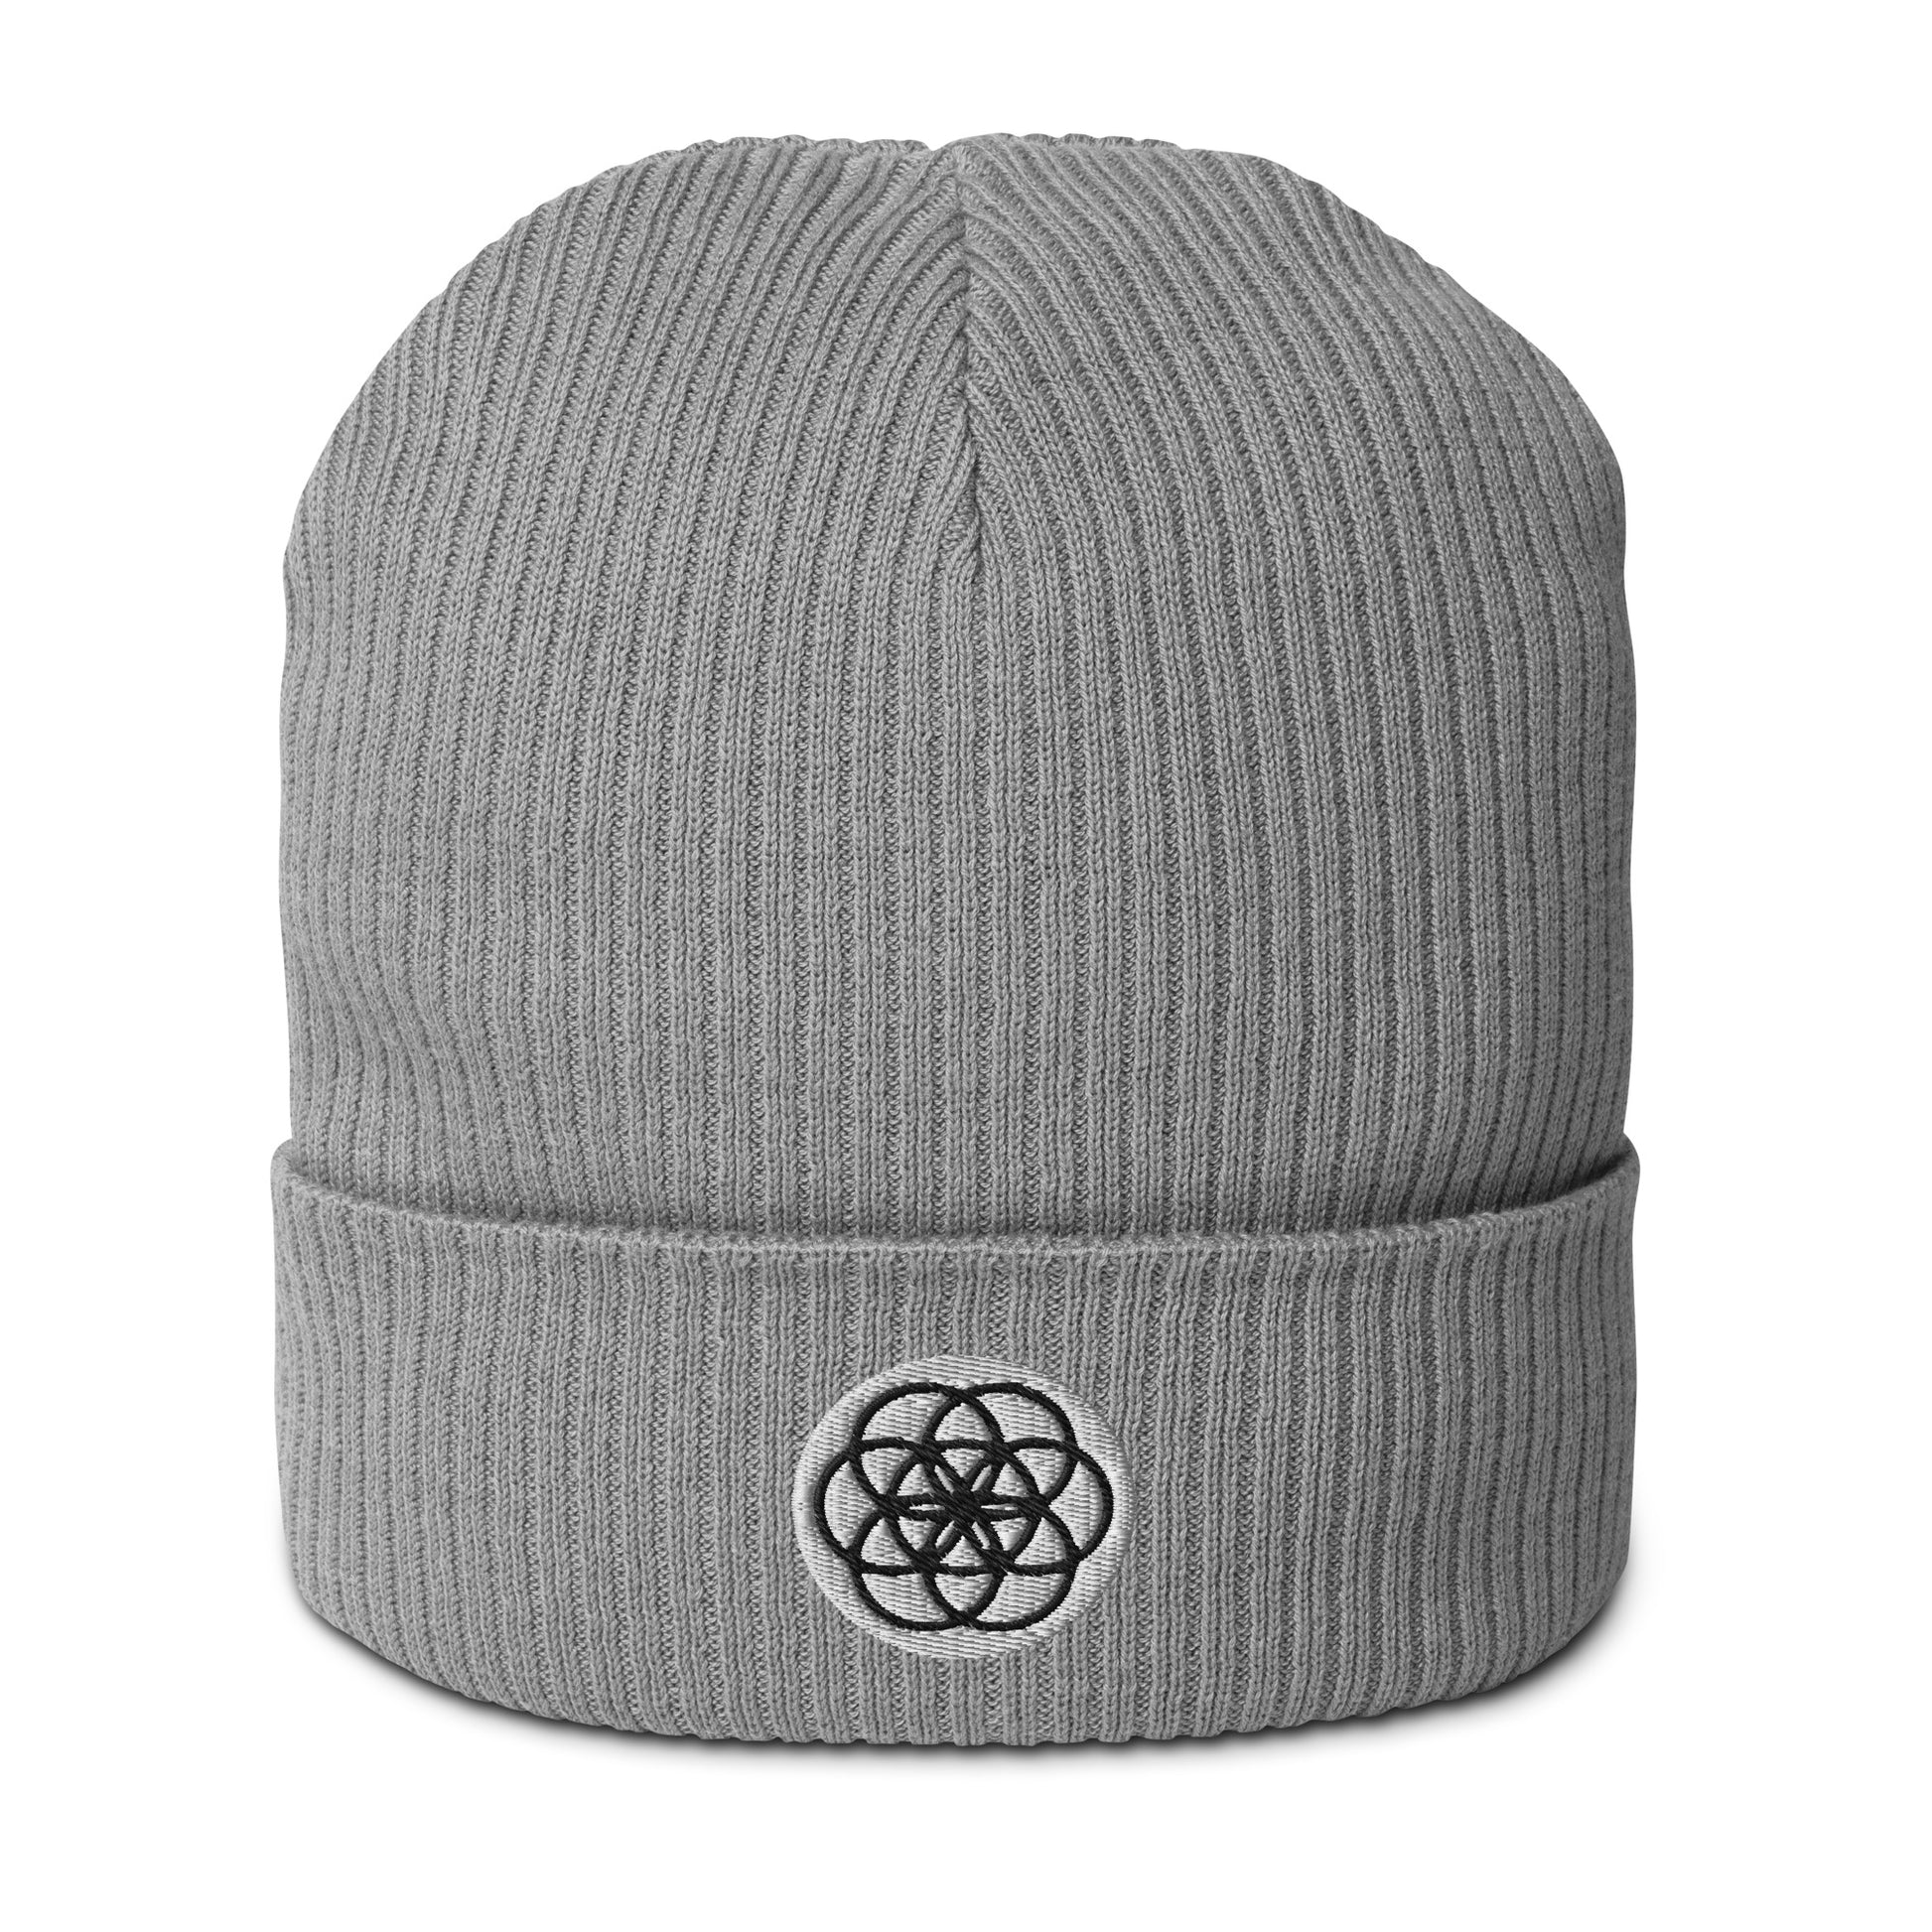 The Seed of Life beanie in Cloudy Gray is made from 100% organic cotton and it’s the perfect cozy addition to your energetically elevated wardrobe. The seed of life is an ancient and meaningful sacred geometry symbol that Whether you're stargazing or navigating the urban jungle, let this beanie remind you of your place in the cosmic tapestry.